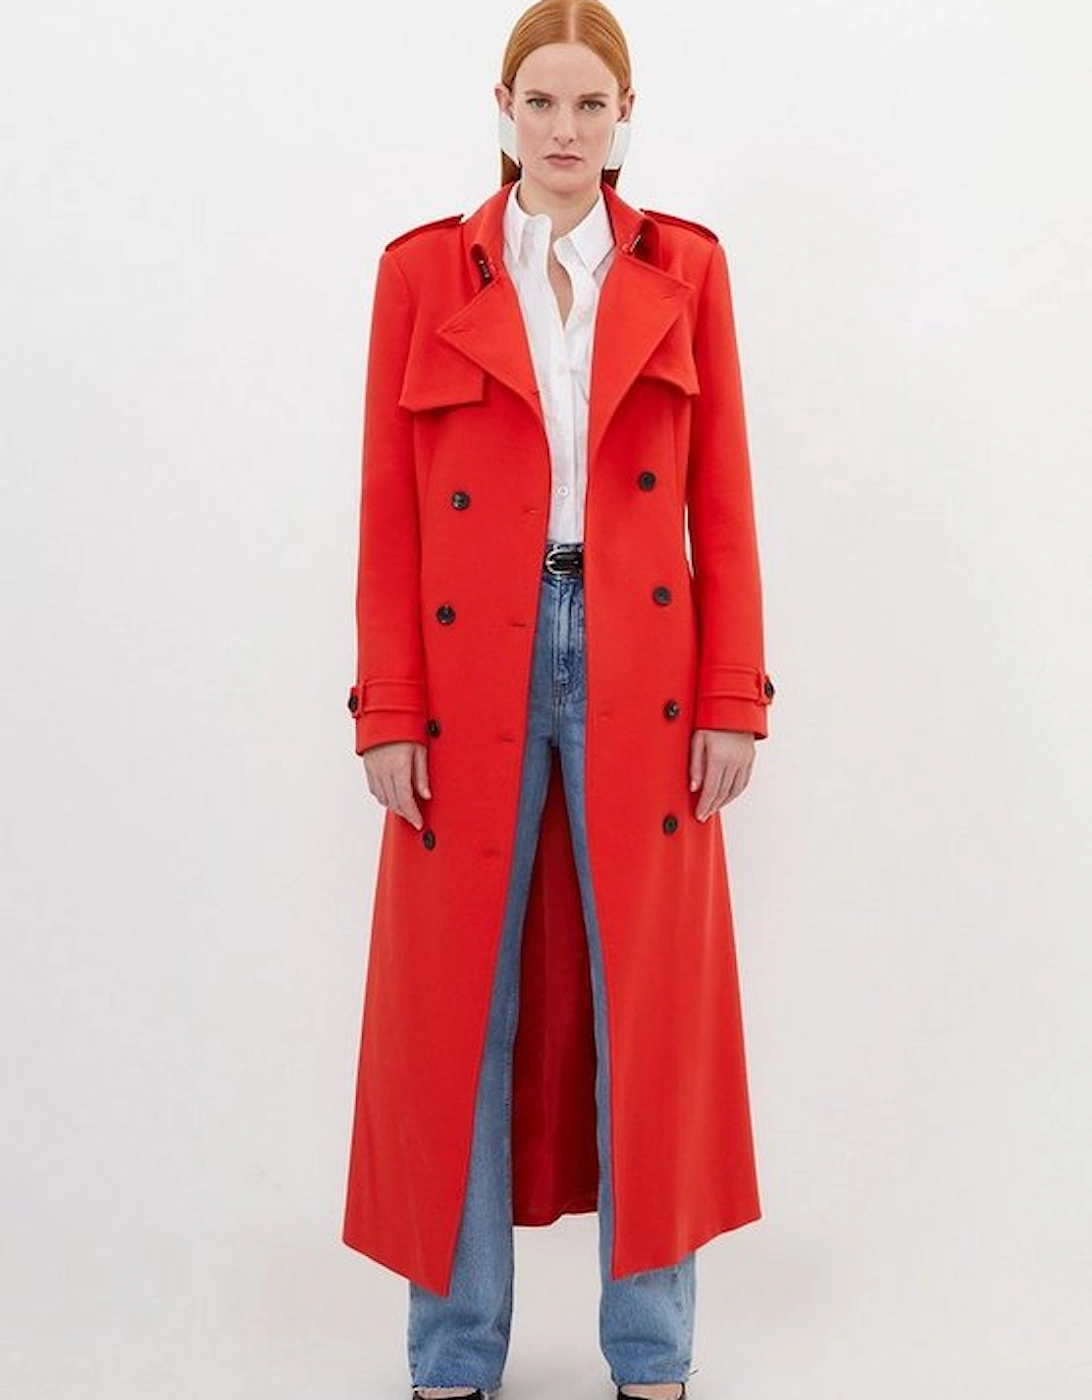 Compact Stretch Tailored Belted Trench Coat